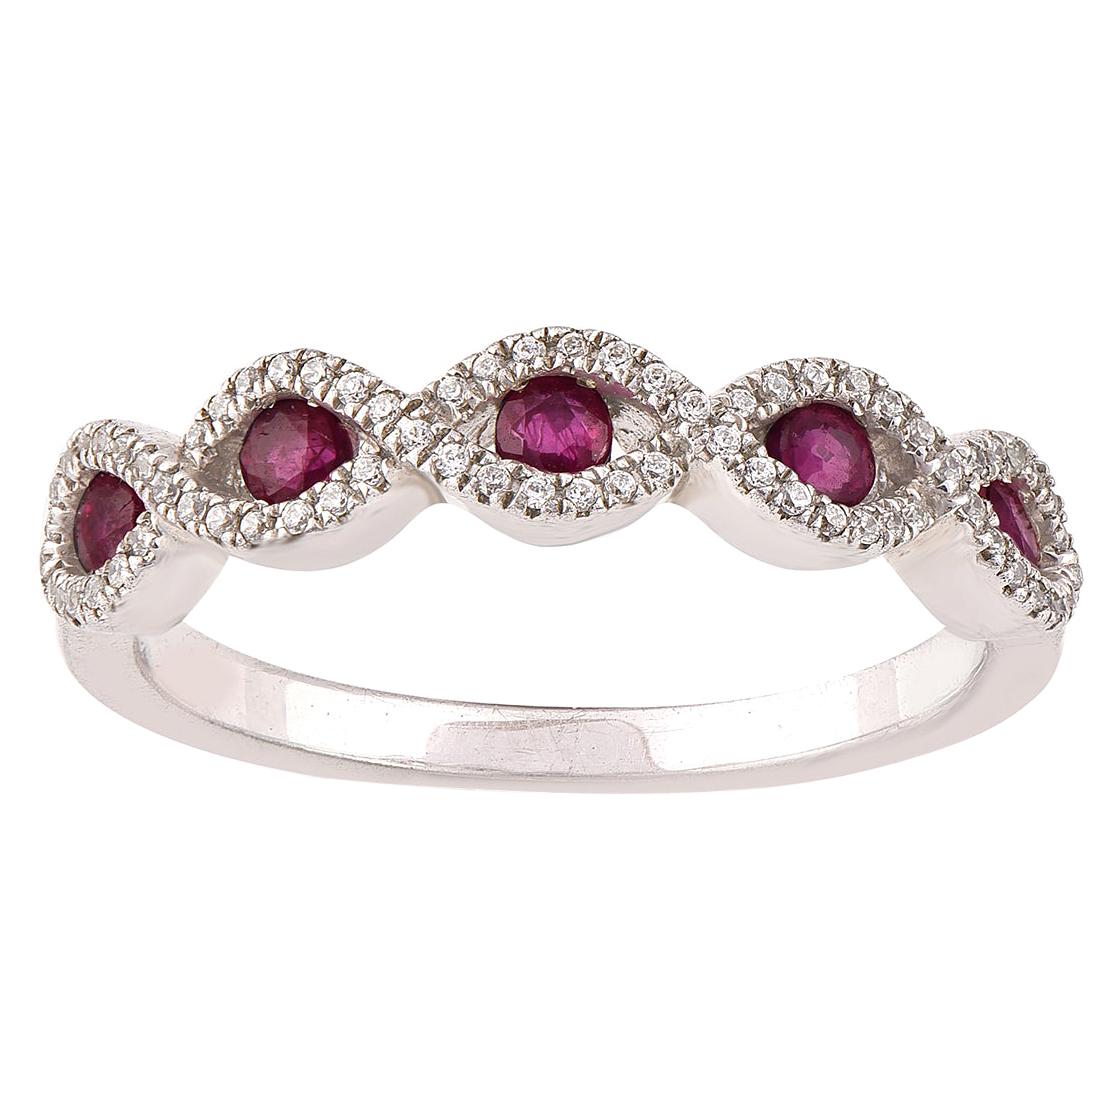 TJD 0.17 Carat Diamond and Ruby 14 Karat White Gold Twisted Infinity Band Ring